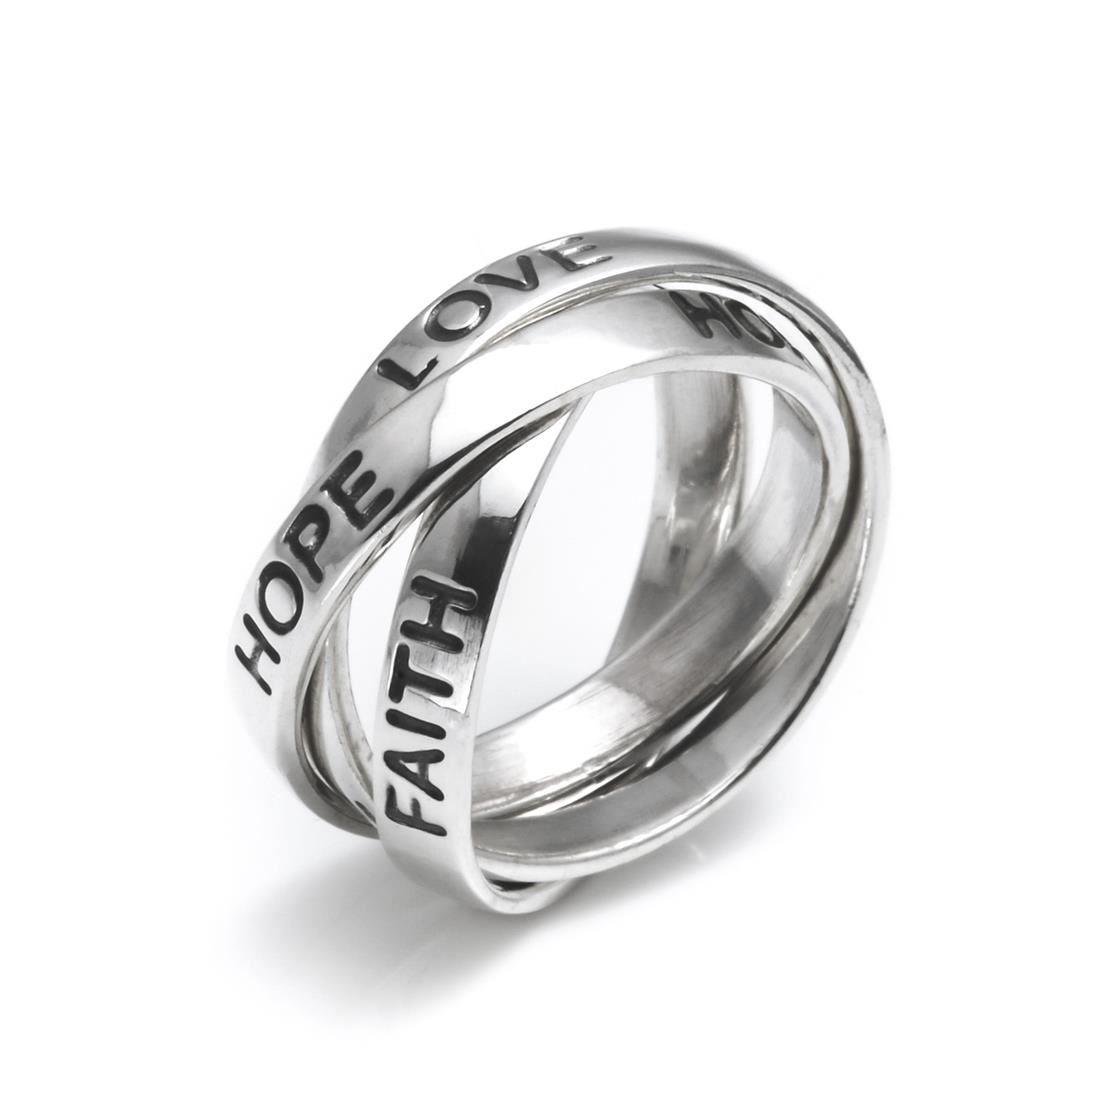 Faith ring stopper ring ring band shiny rhodium plated 925 silver -  Gioiellitaly